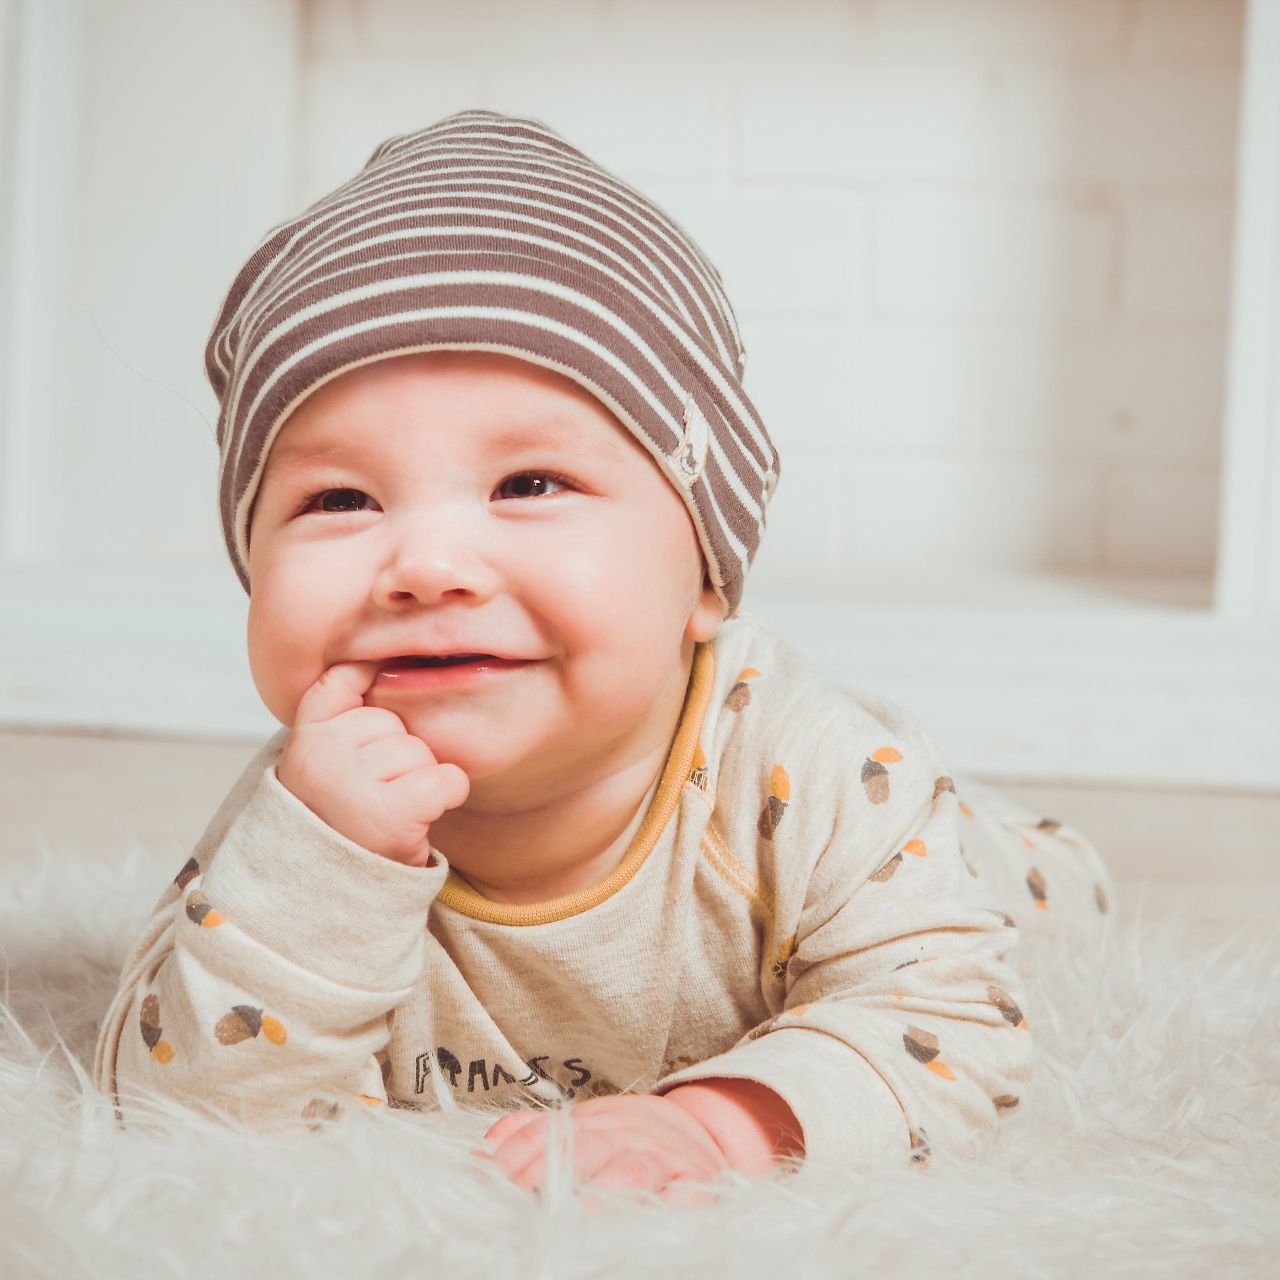 Image of infant with finger in mouth smiling.